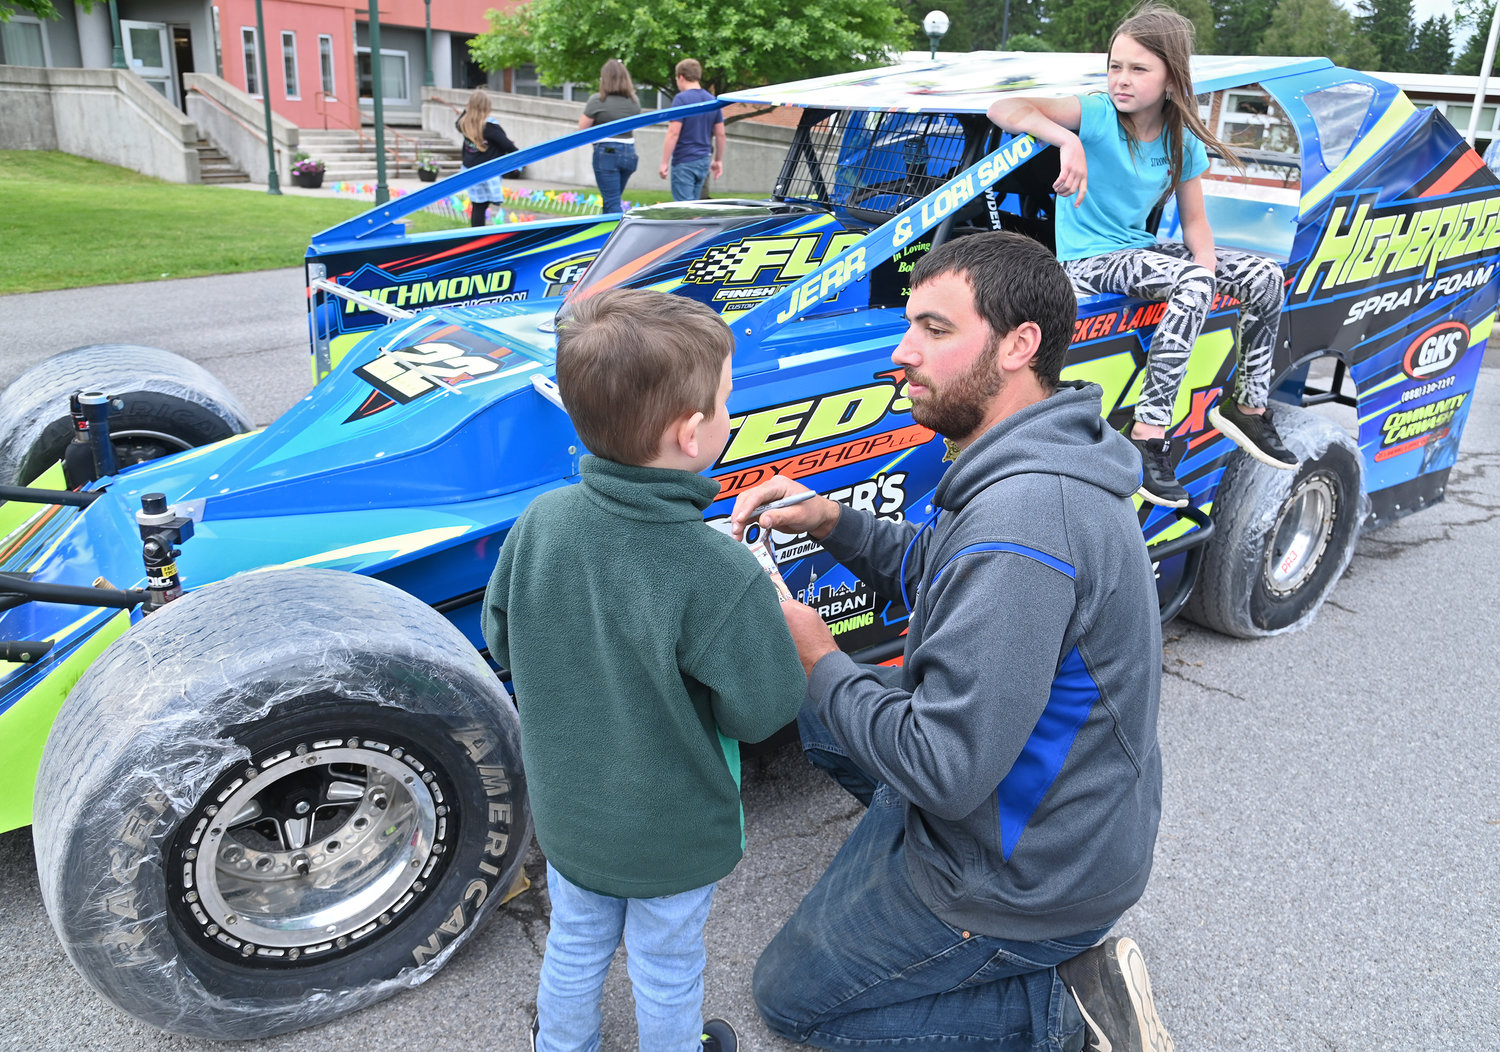 GETTING A GOOD LOOK — Sportsman standout driver Michael Richmond answers questions from Ivan Crawford, 4, about his race car Thursday at the Touch A Truck event J. D. George Elementary School in Verona. Sitting on the door of the race car is Sophie Suits. Also at the event was a Verona Fire Department truck, Oneida County Sheriff’s Office police car, Town of Verona dump/plow truck, garbage truck, food truck and boom truck. Richmond will be racing tonight at Utica-Rome Speedway, where admission will be $5 at the track in Vernon. For more information, visit uticaromespeedway.com.